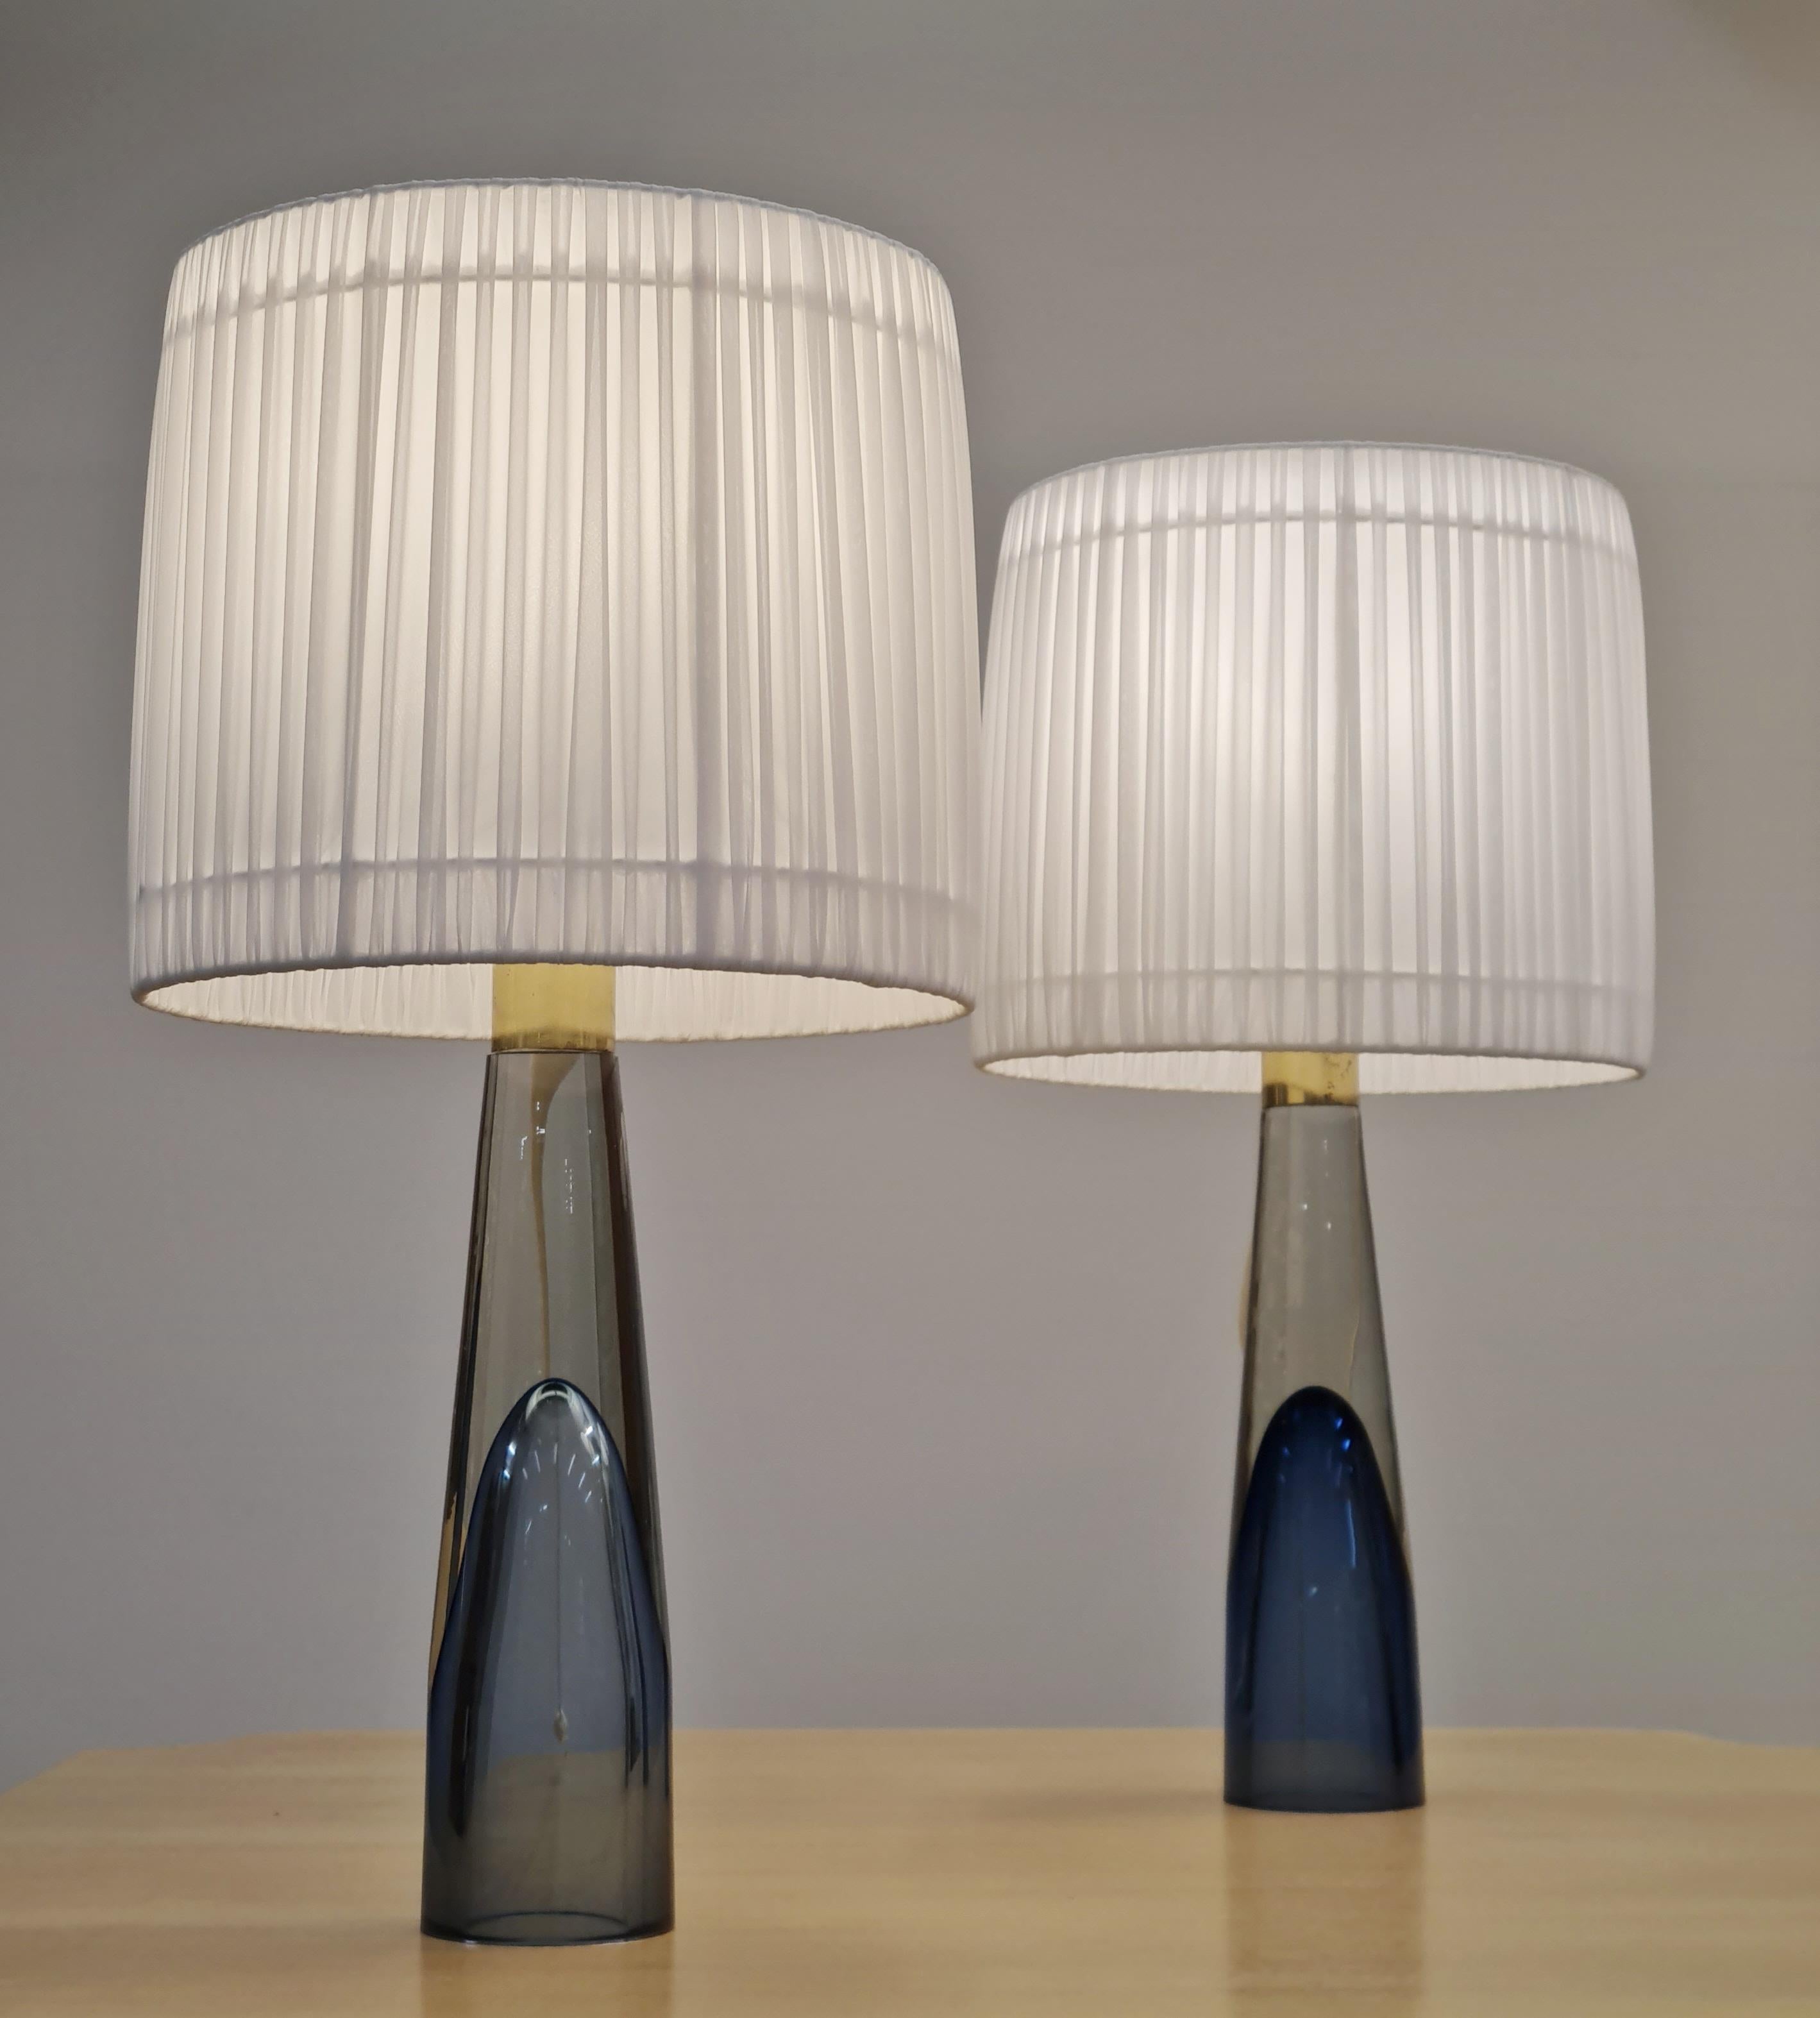 These lamps can be bought as a pair or individually, and even though they aren't an exact match they go perfectly together. Both lamps are exceedingly beautiful with see through art glass legs with a dark blue color within. One of the finest works